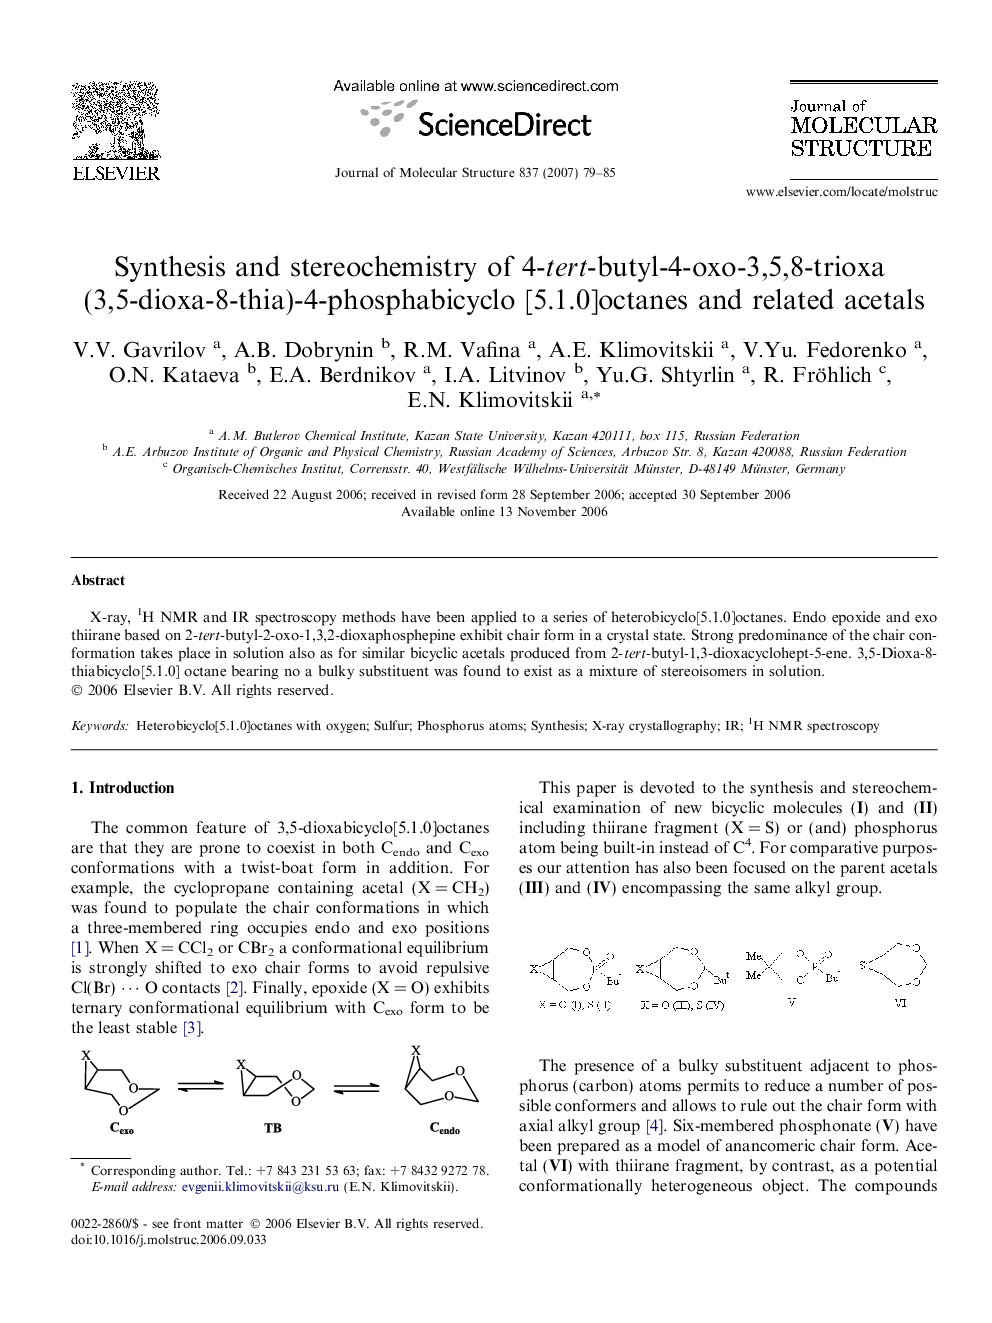 Synthesis and stereochemistry of 4-tert-butyl-4-oxo-3,5,8-trioxa (3,5-dioxa-8-thia)-4-phosphabicyclo [5.1.0]octanes and related acetals